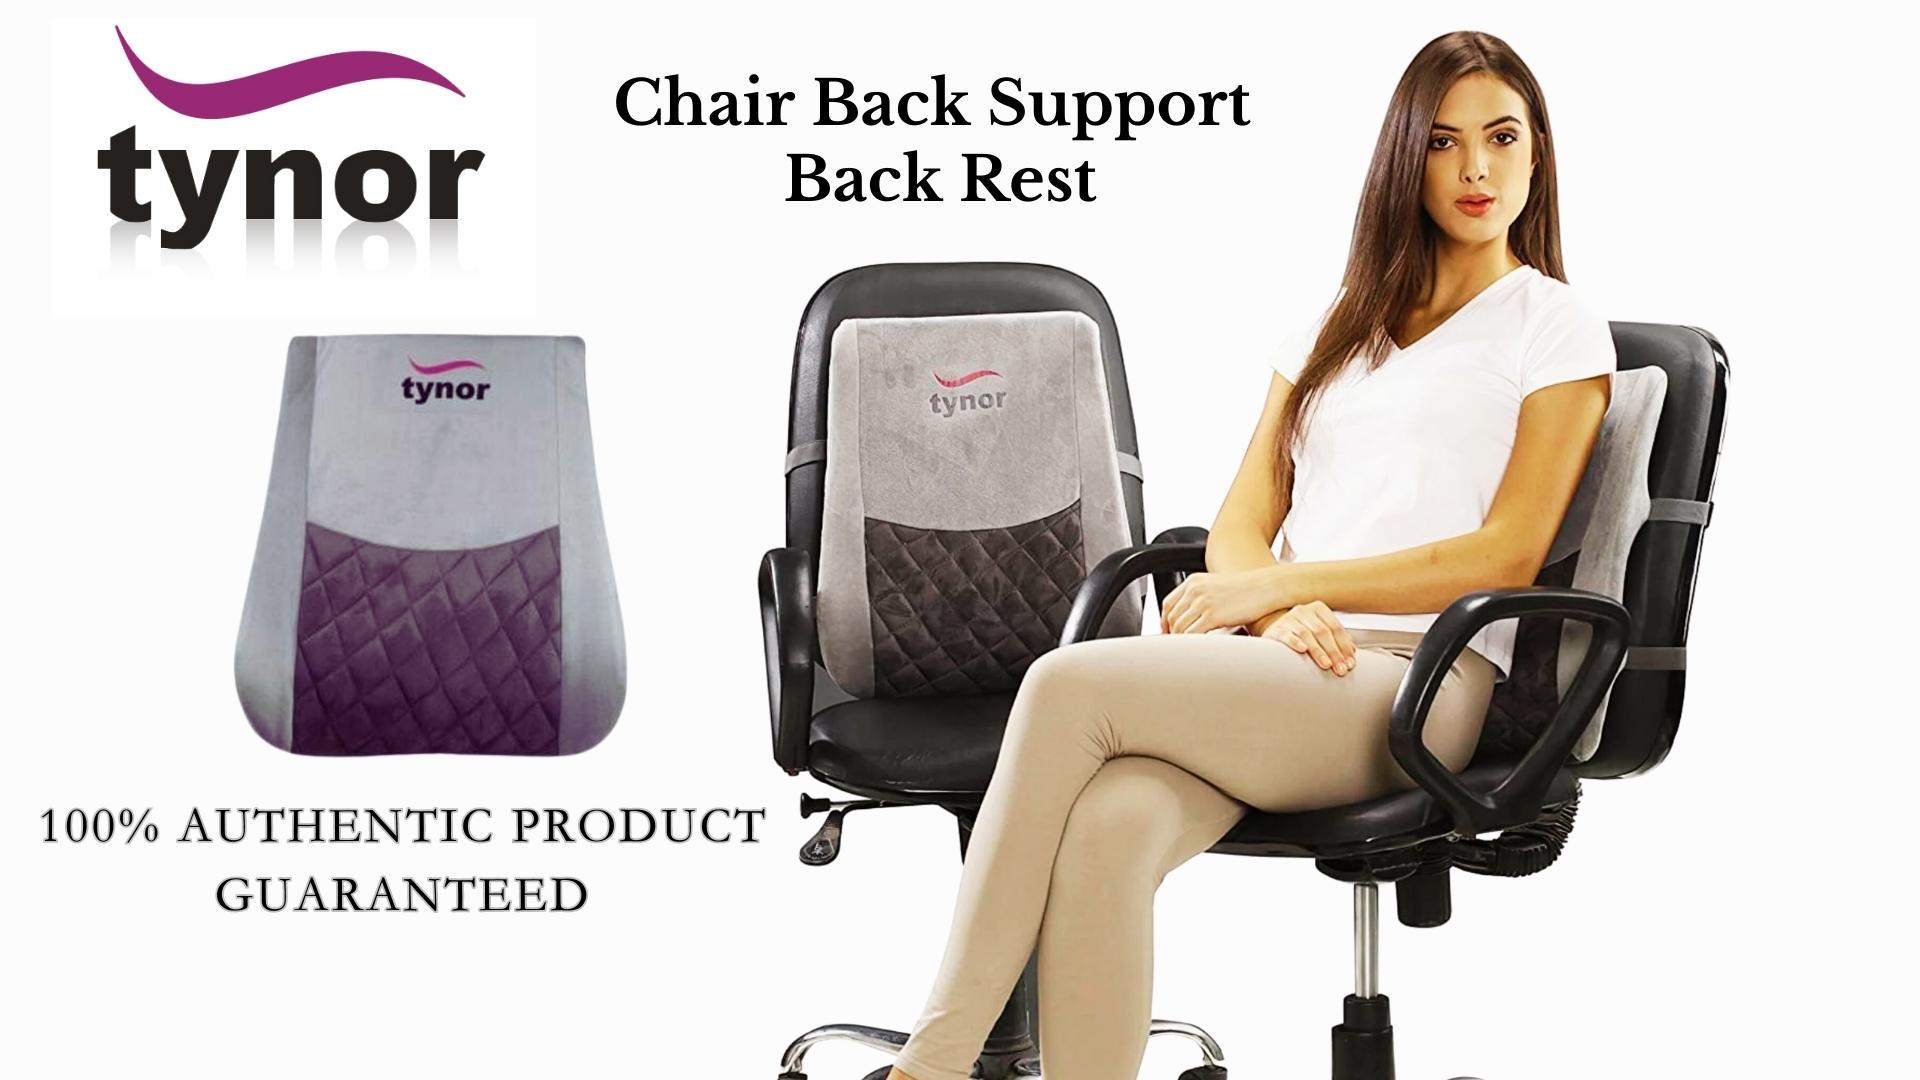 Chair Back Support Price in BD, Image of Chair Back Support